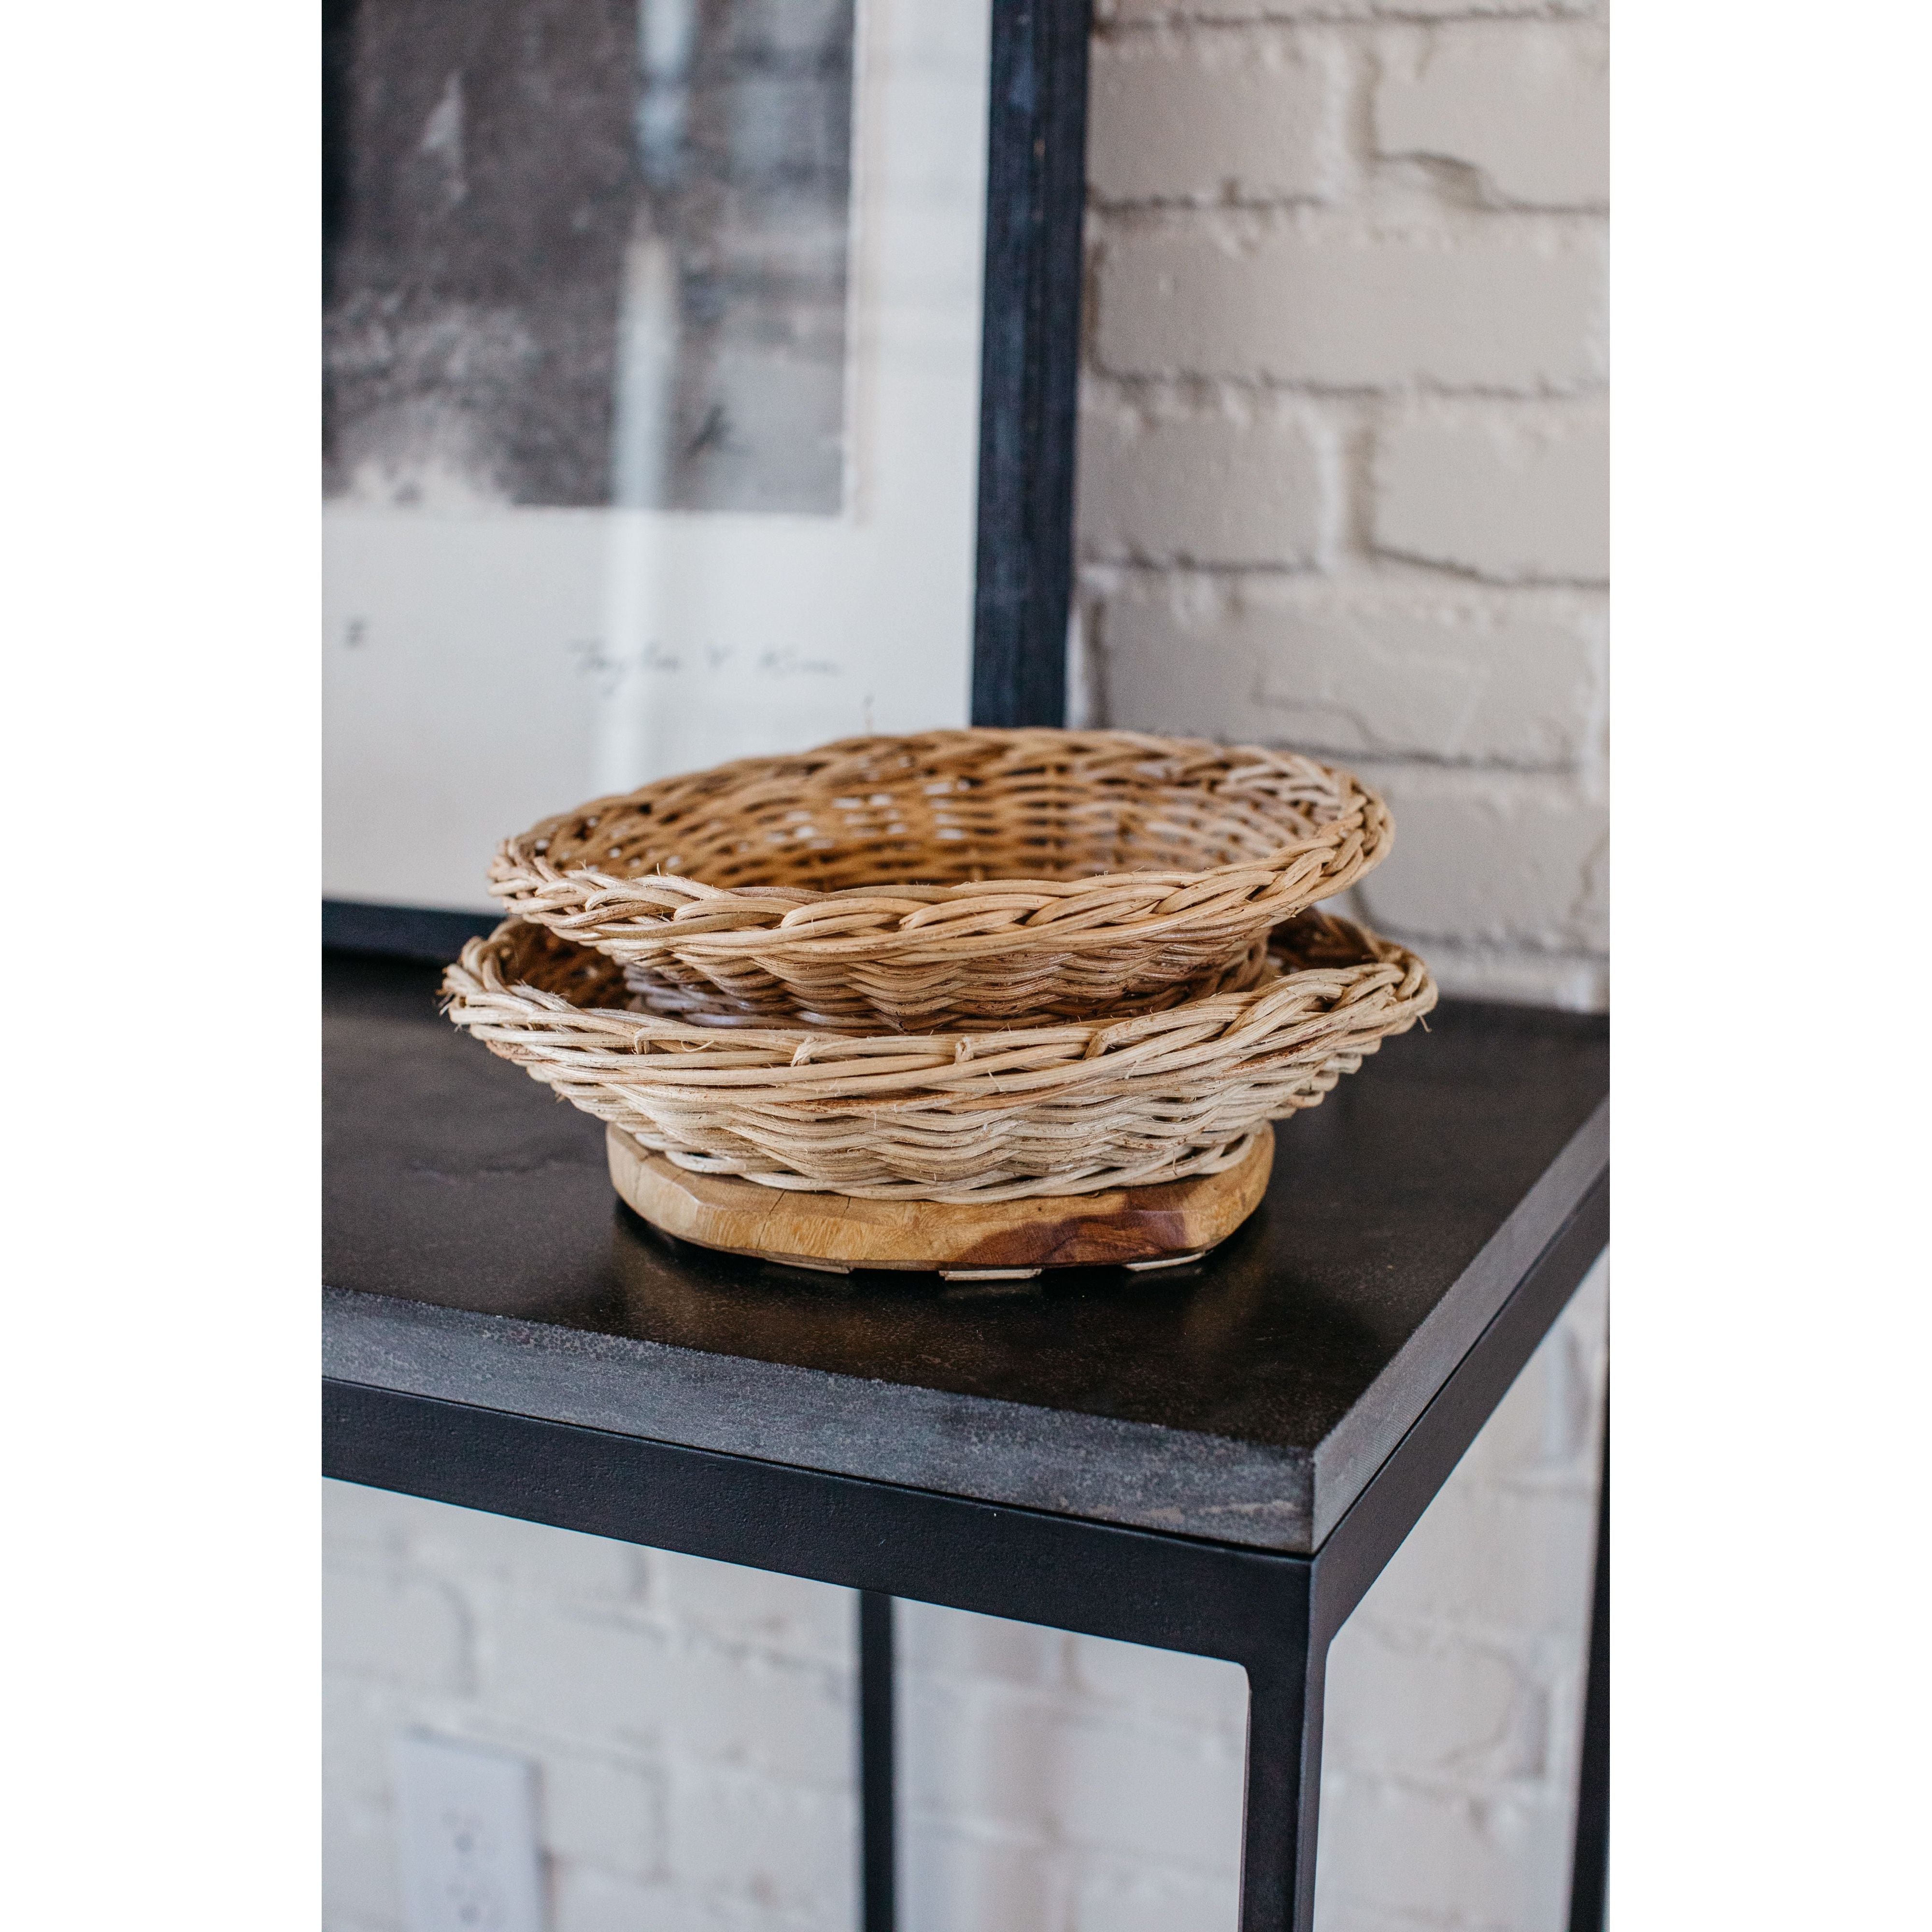 We love the organic look of this hand-woven Rattan & Mango Wood Live Edge Bowl. Showcase your favorite accessories or place your dried flowers to complete the look.   Small: 11"L x 10"W  Medium: 13"L x 9.5"W